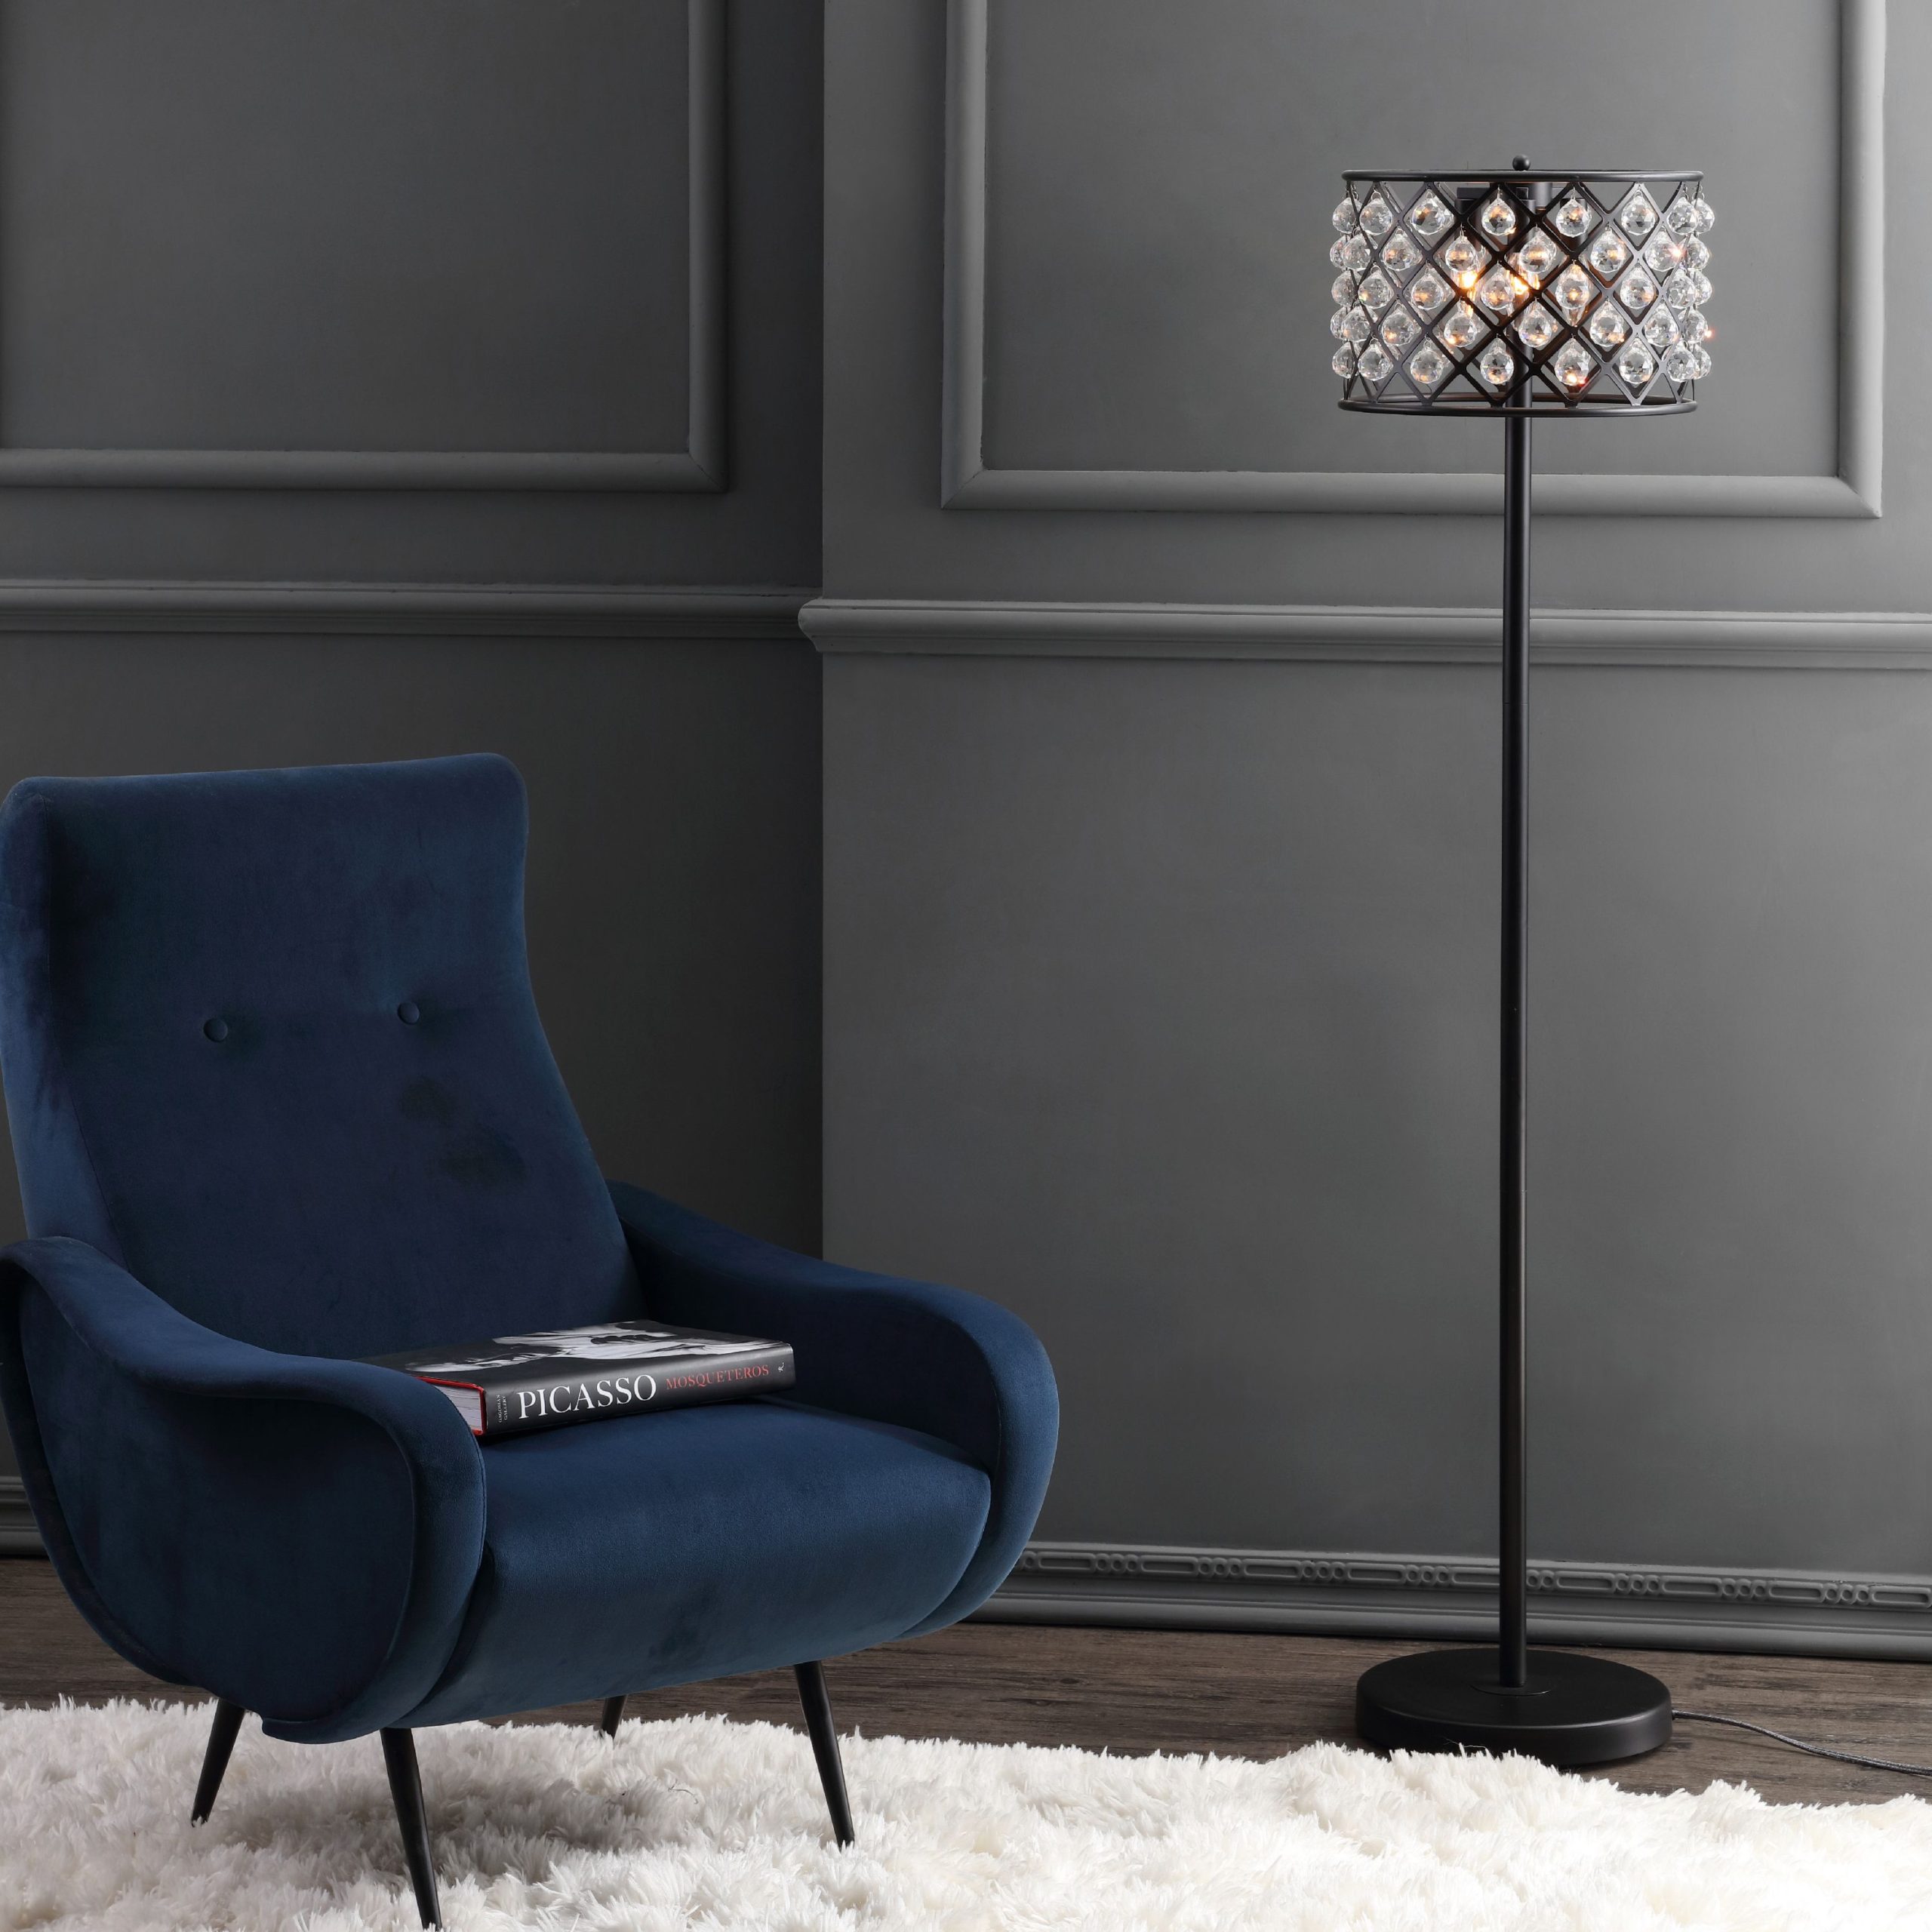 JONATHAN scaled 15 Unique Artistic Floor Lamps to Light Your Bedroom - 42